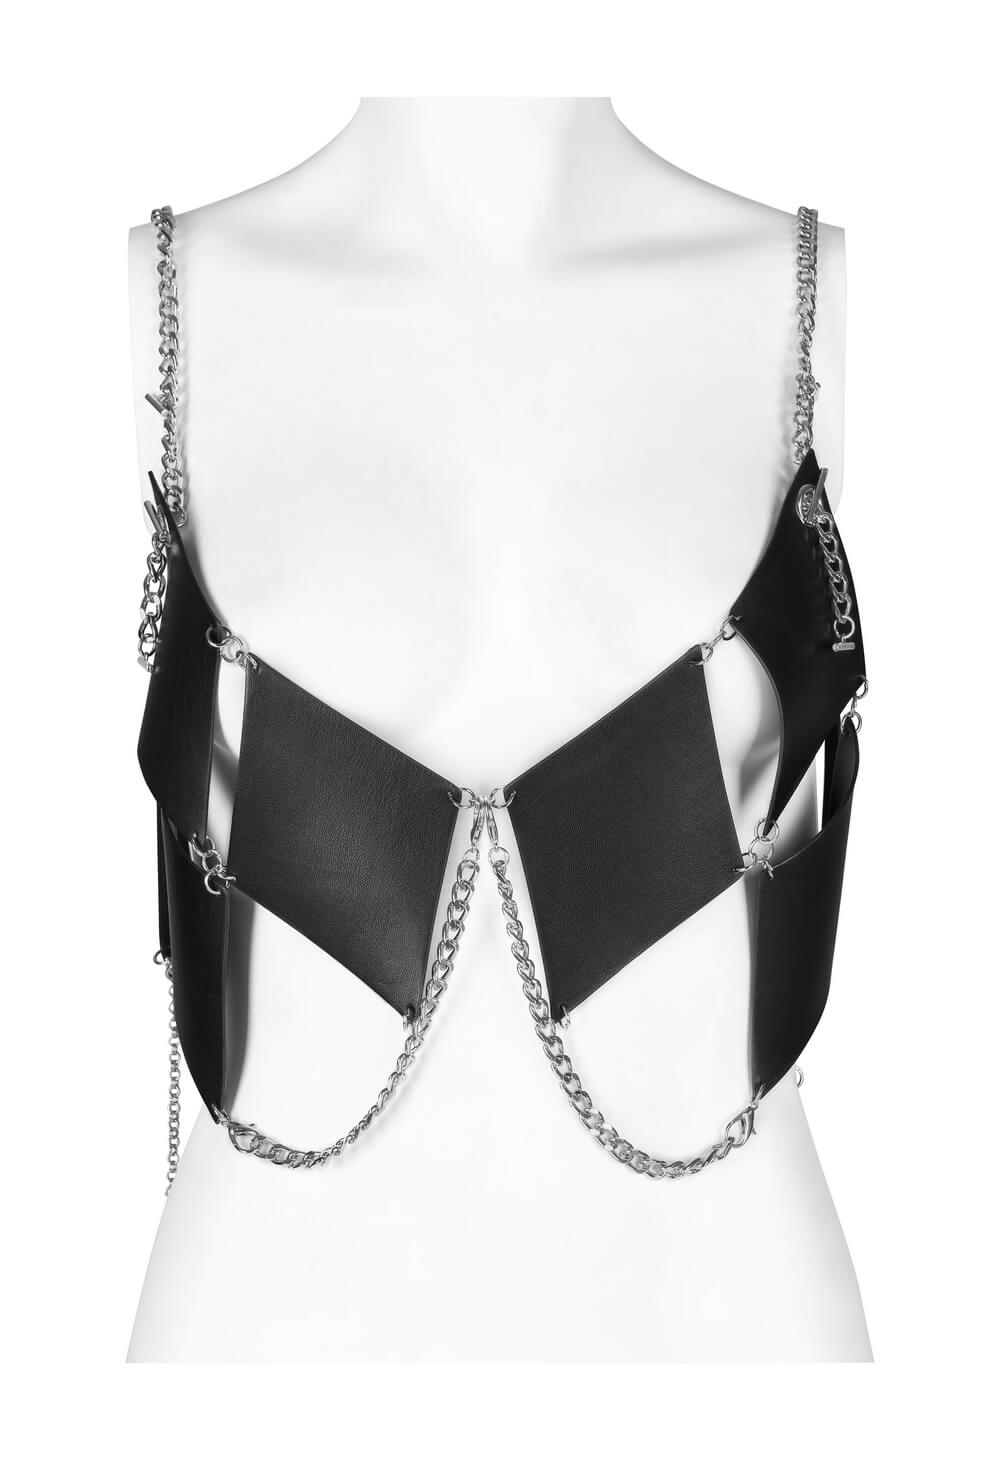 Black Vegan Leather Multi-Strap Chain Harness Top for Edgy Style - HARD'N'HEAVY